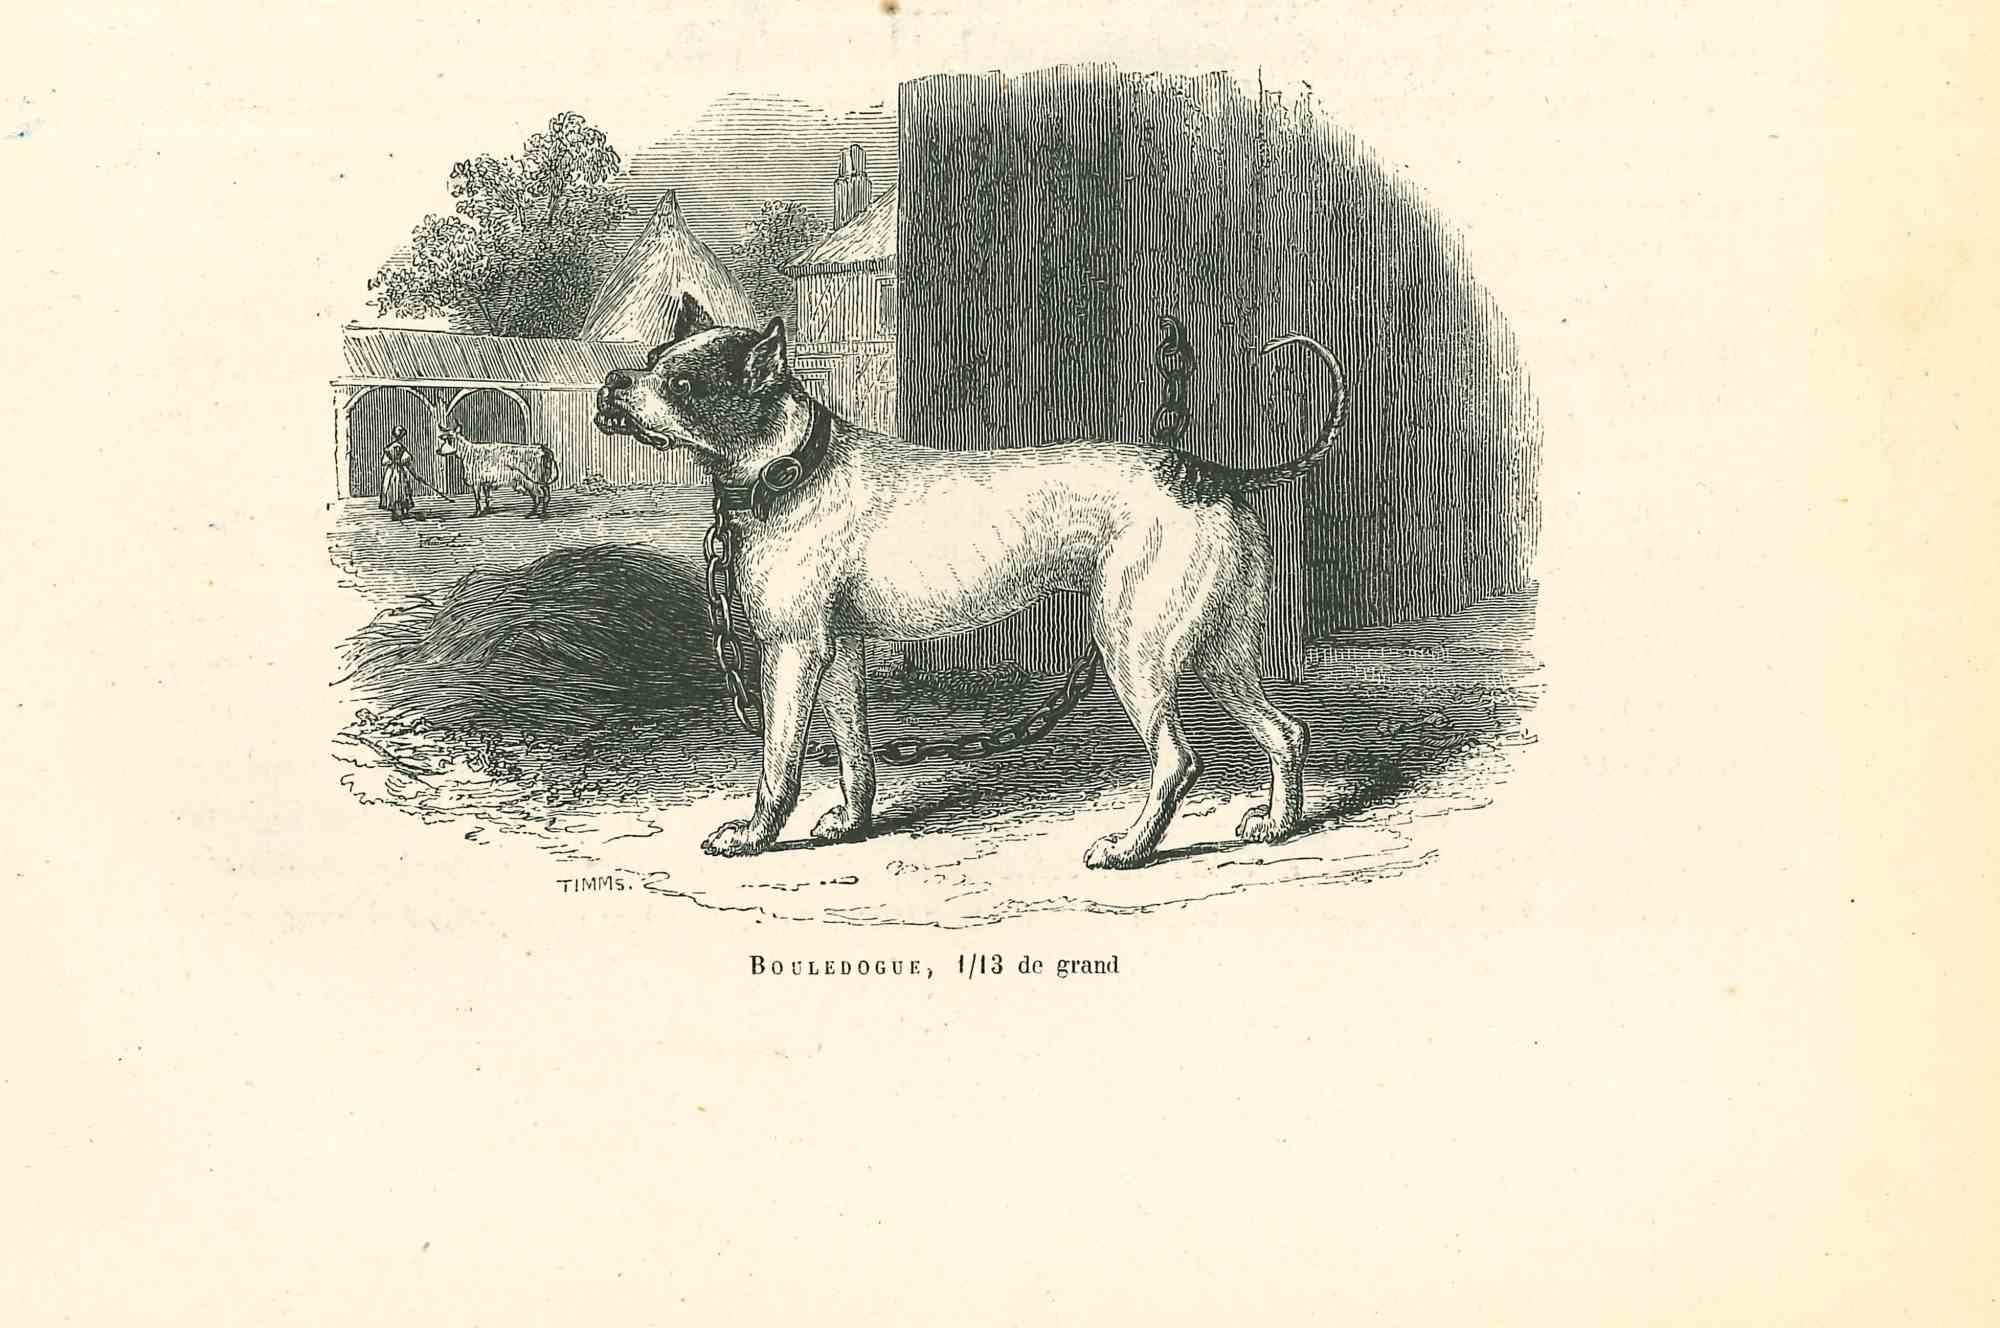 The Bulldog is an original lithograph on ivory-colored paper, realized by Paul Gervais (1816-1879). The artwork is from The Series of "Les Trois Règnes de la Nature", and was published in 1854.

Good conditions.

Titled on the lower. With the notes